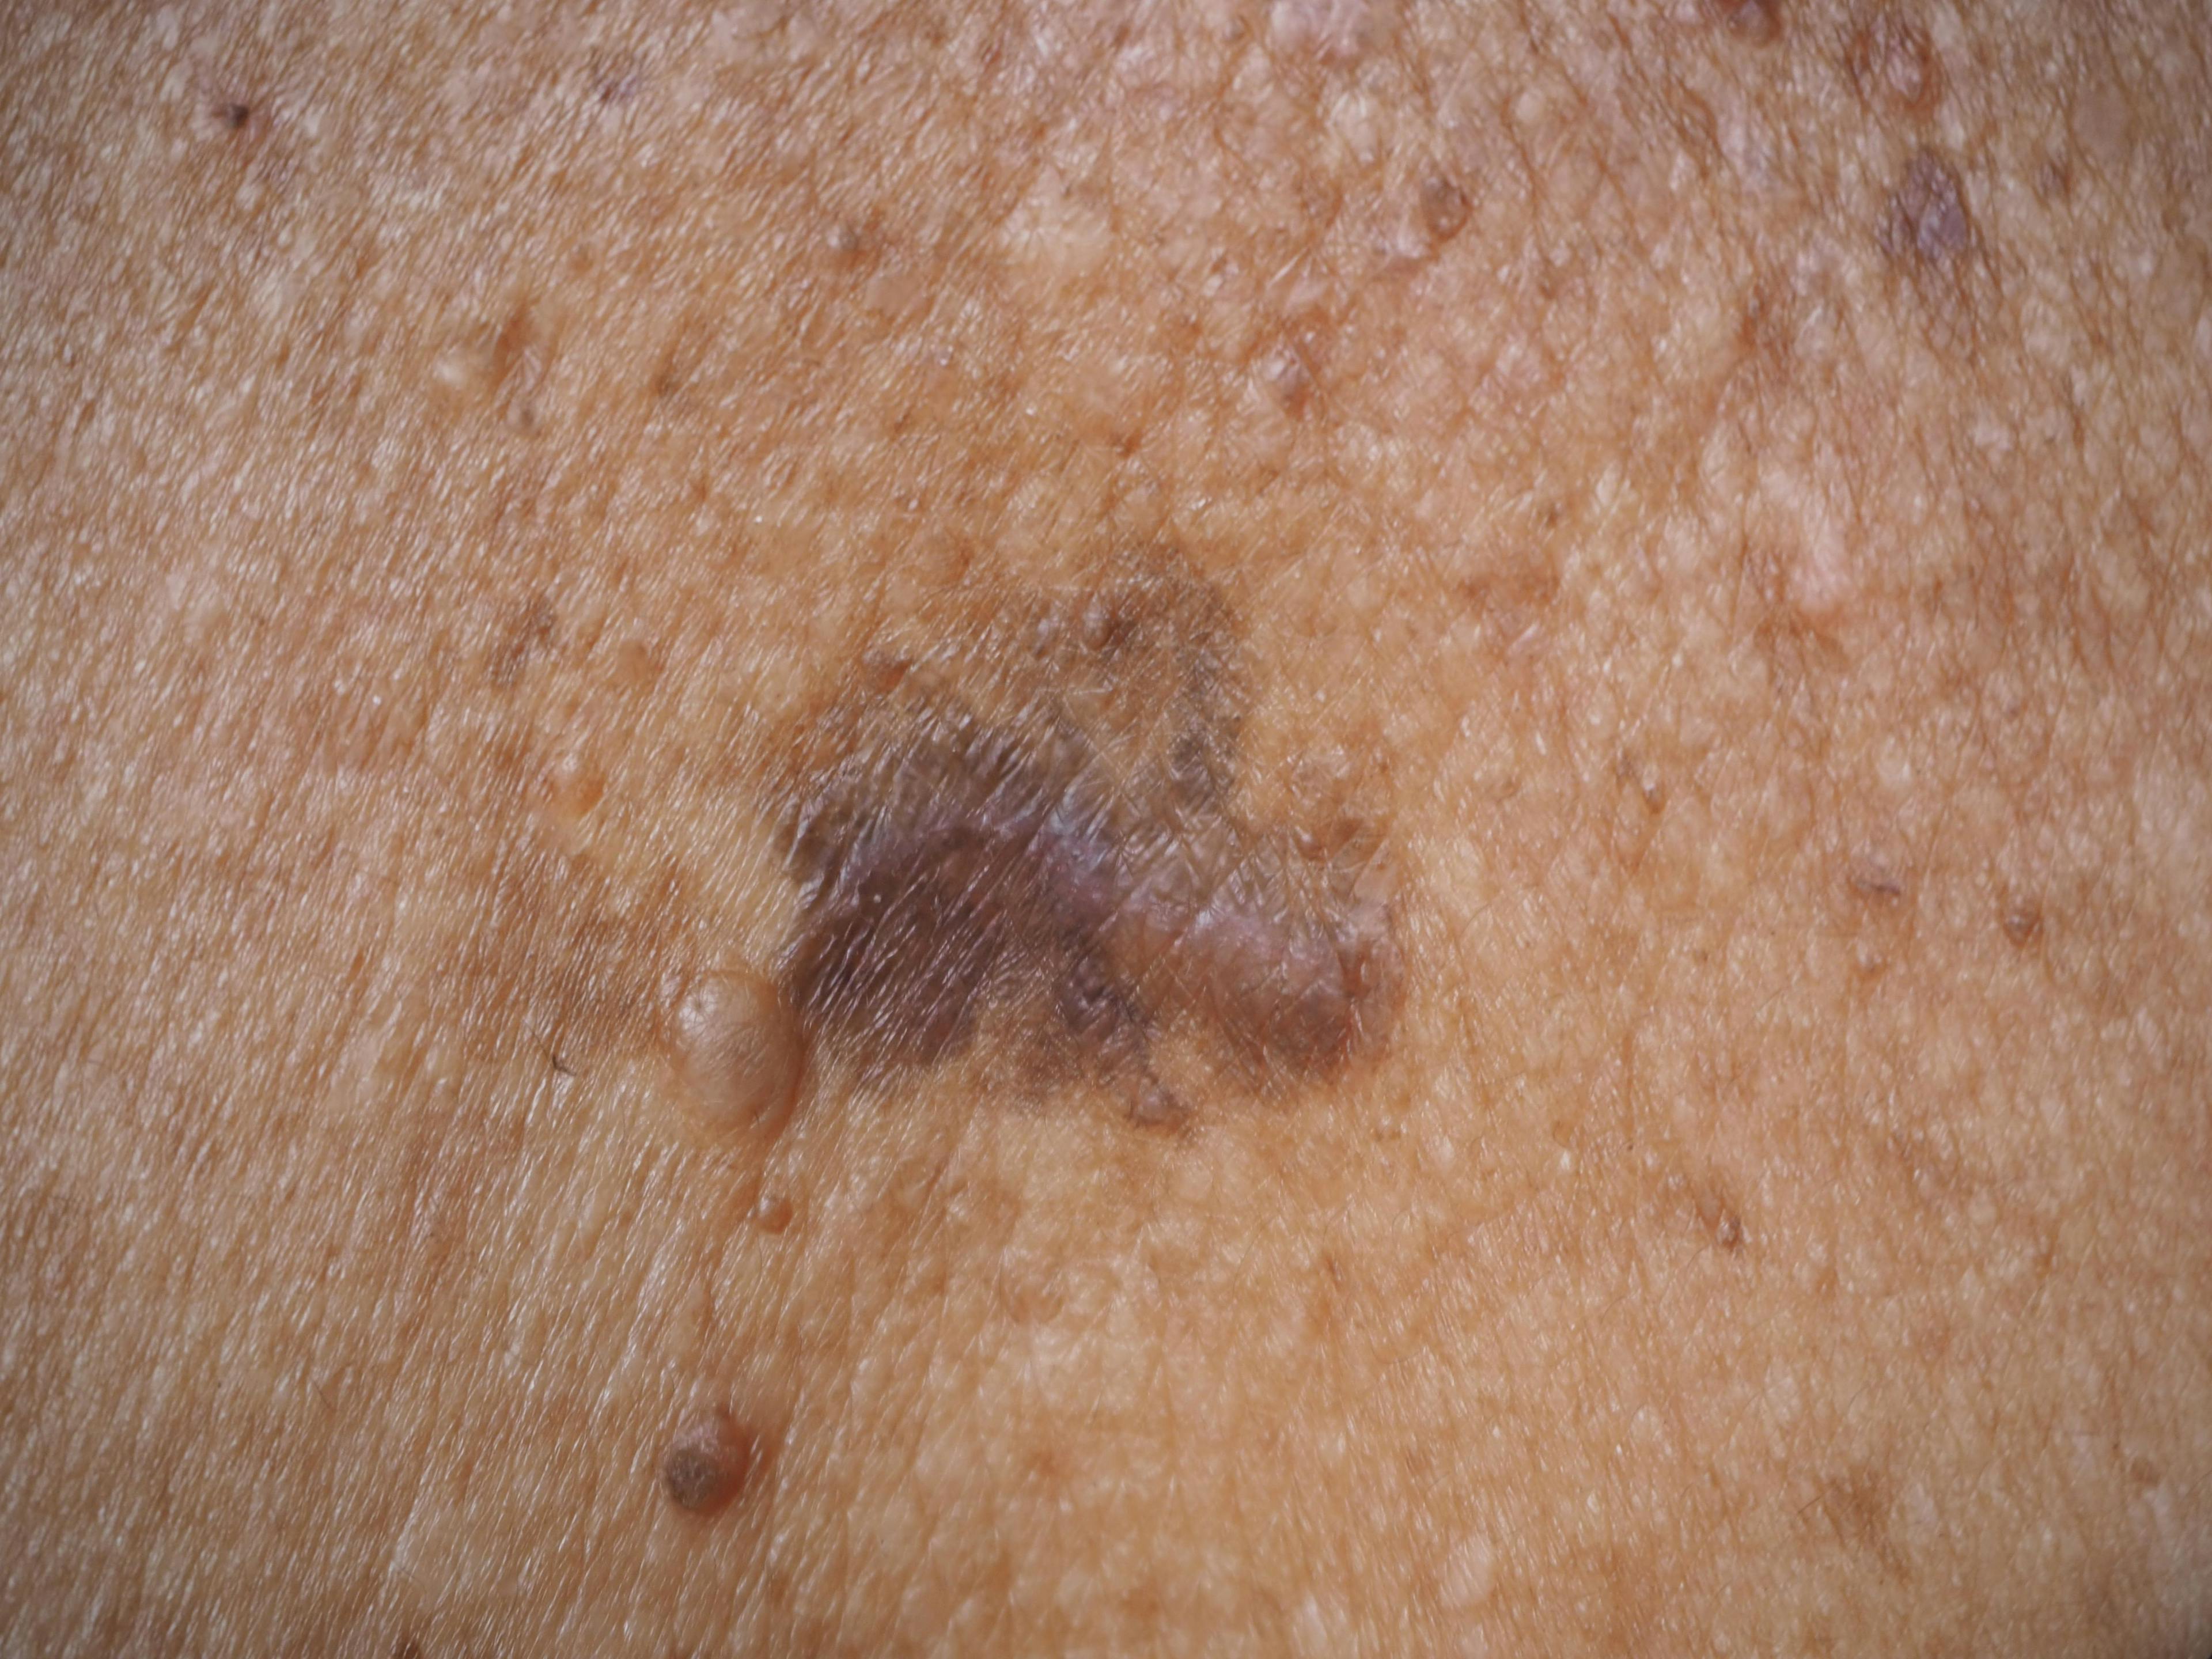 Study: Knowing Skin Cancer Risk May Limit Unhealthy Behavior